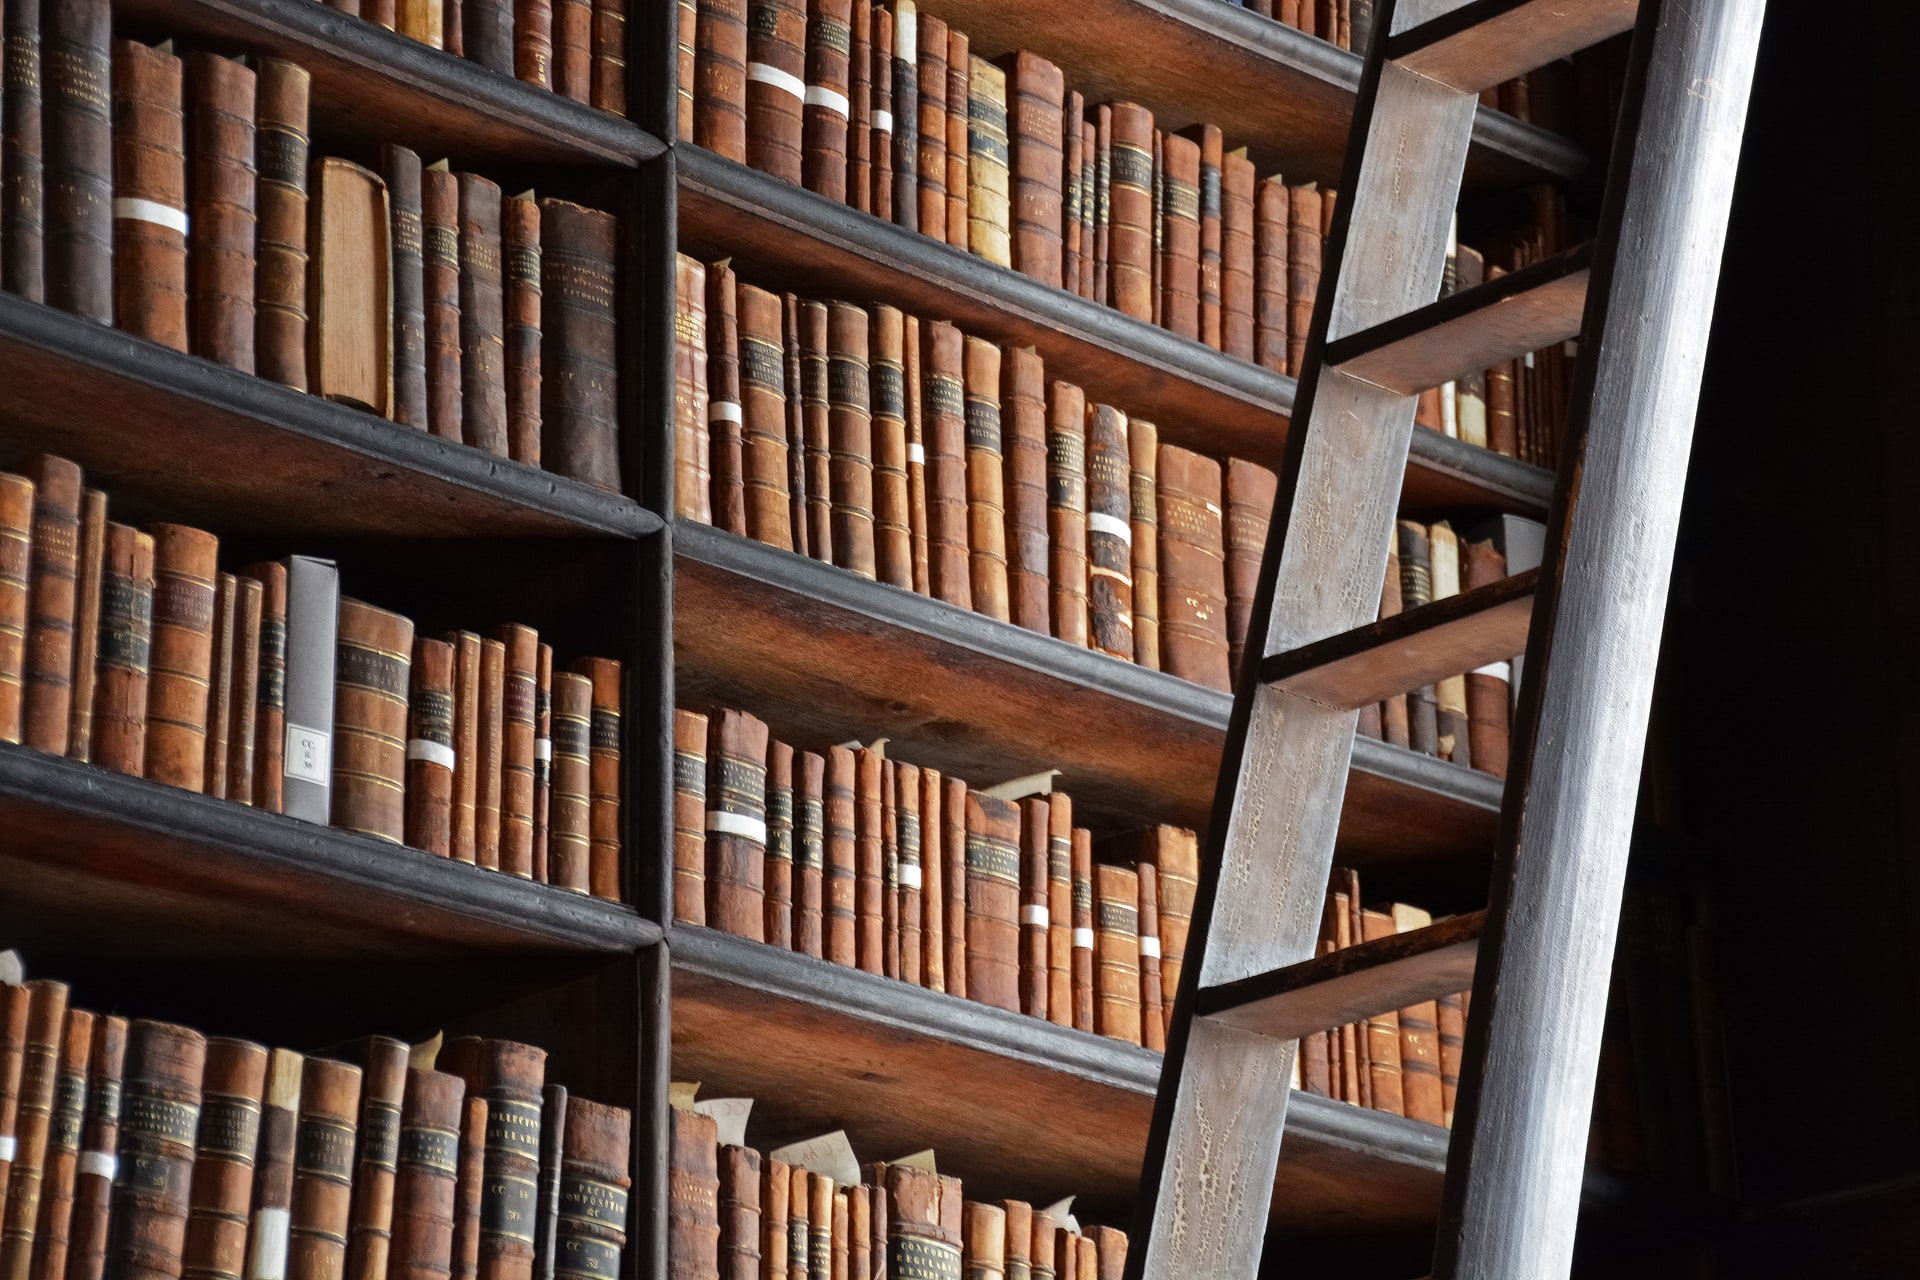 A shot of a library with brown bookshelves with old books and a wooden ladder in the foreground